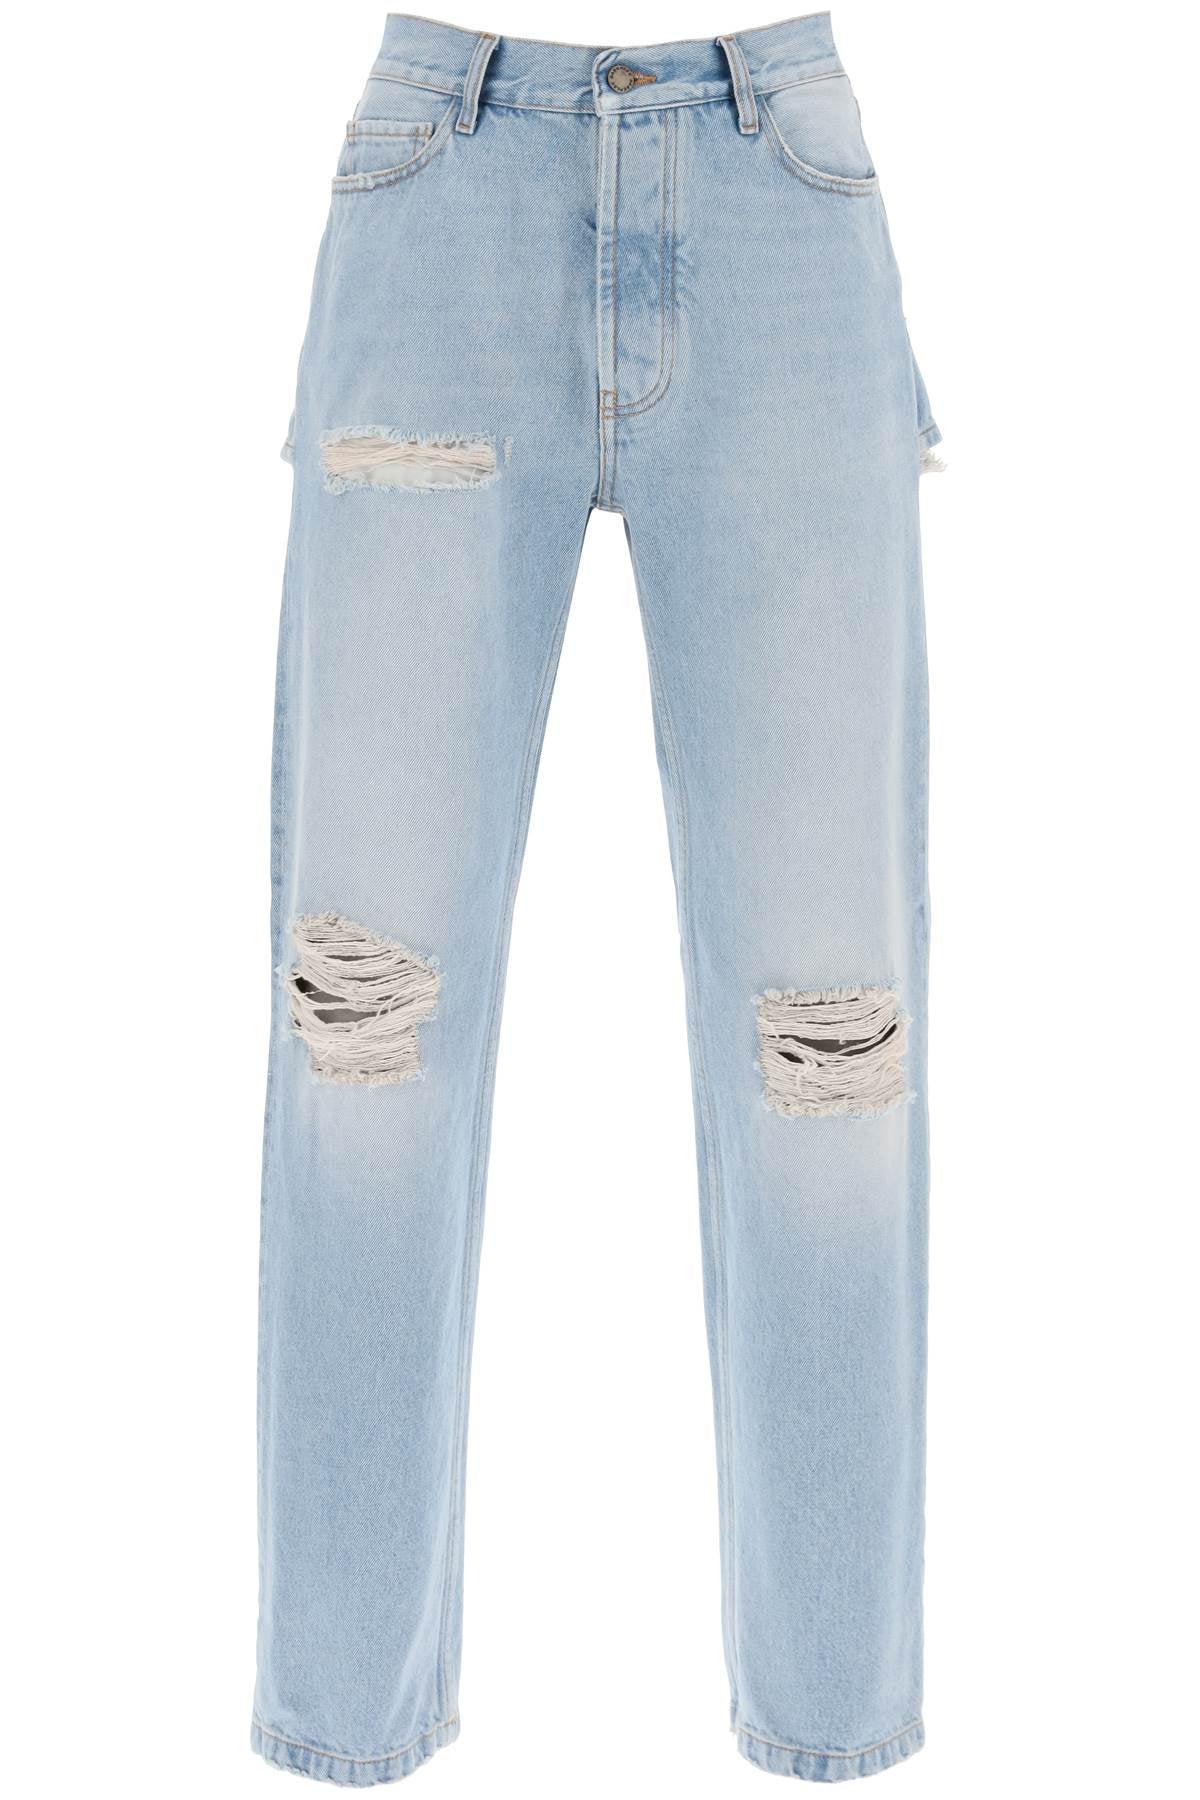 Darkpark naomi jeans with rips and cut outs-0